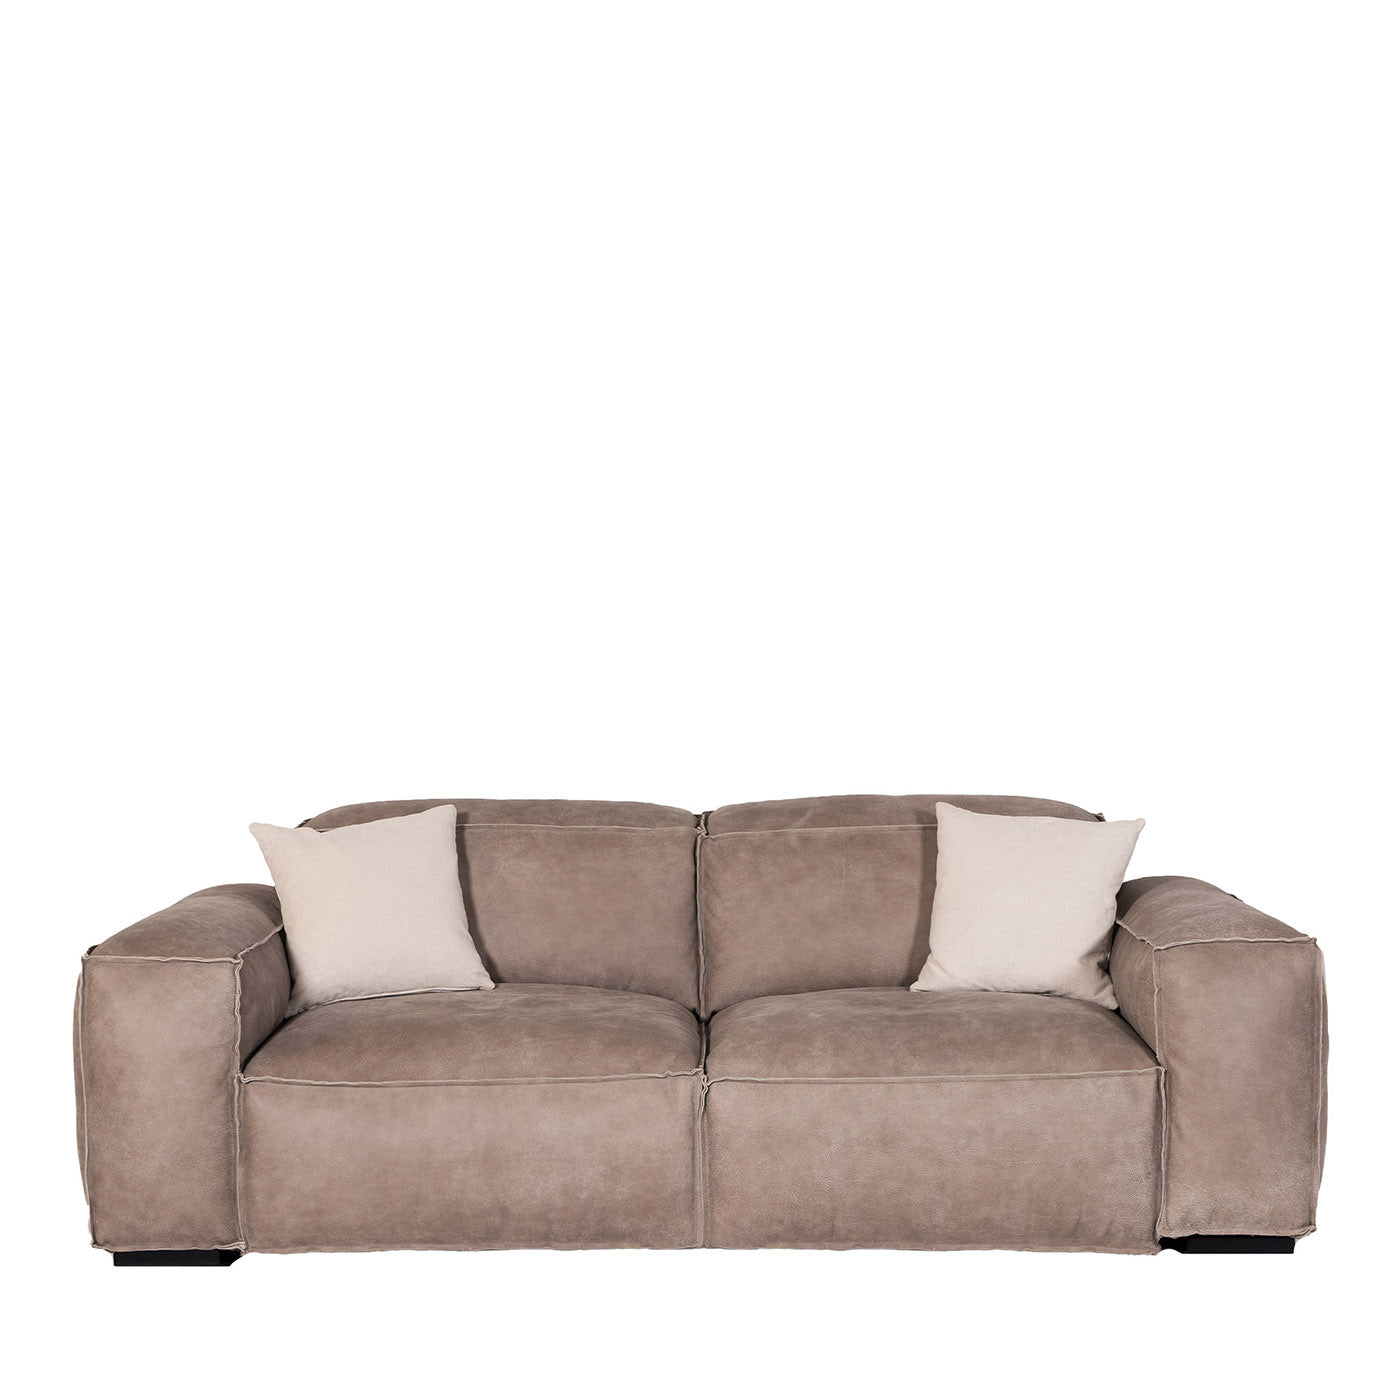 Placido 2 Seater Sofa in Gray Leather  - Main view